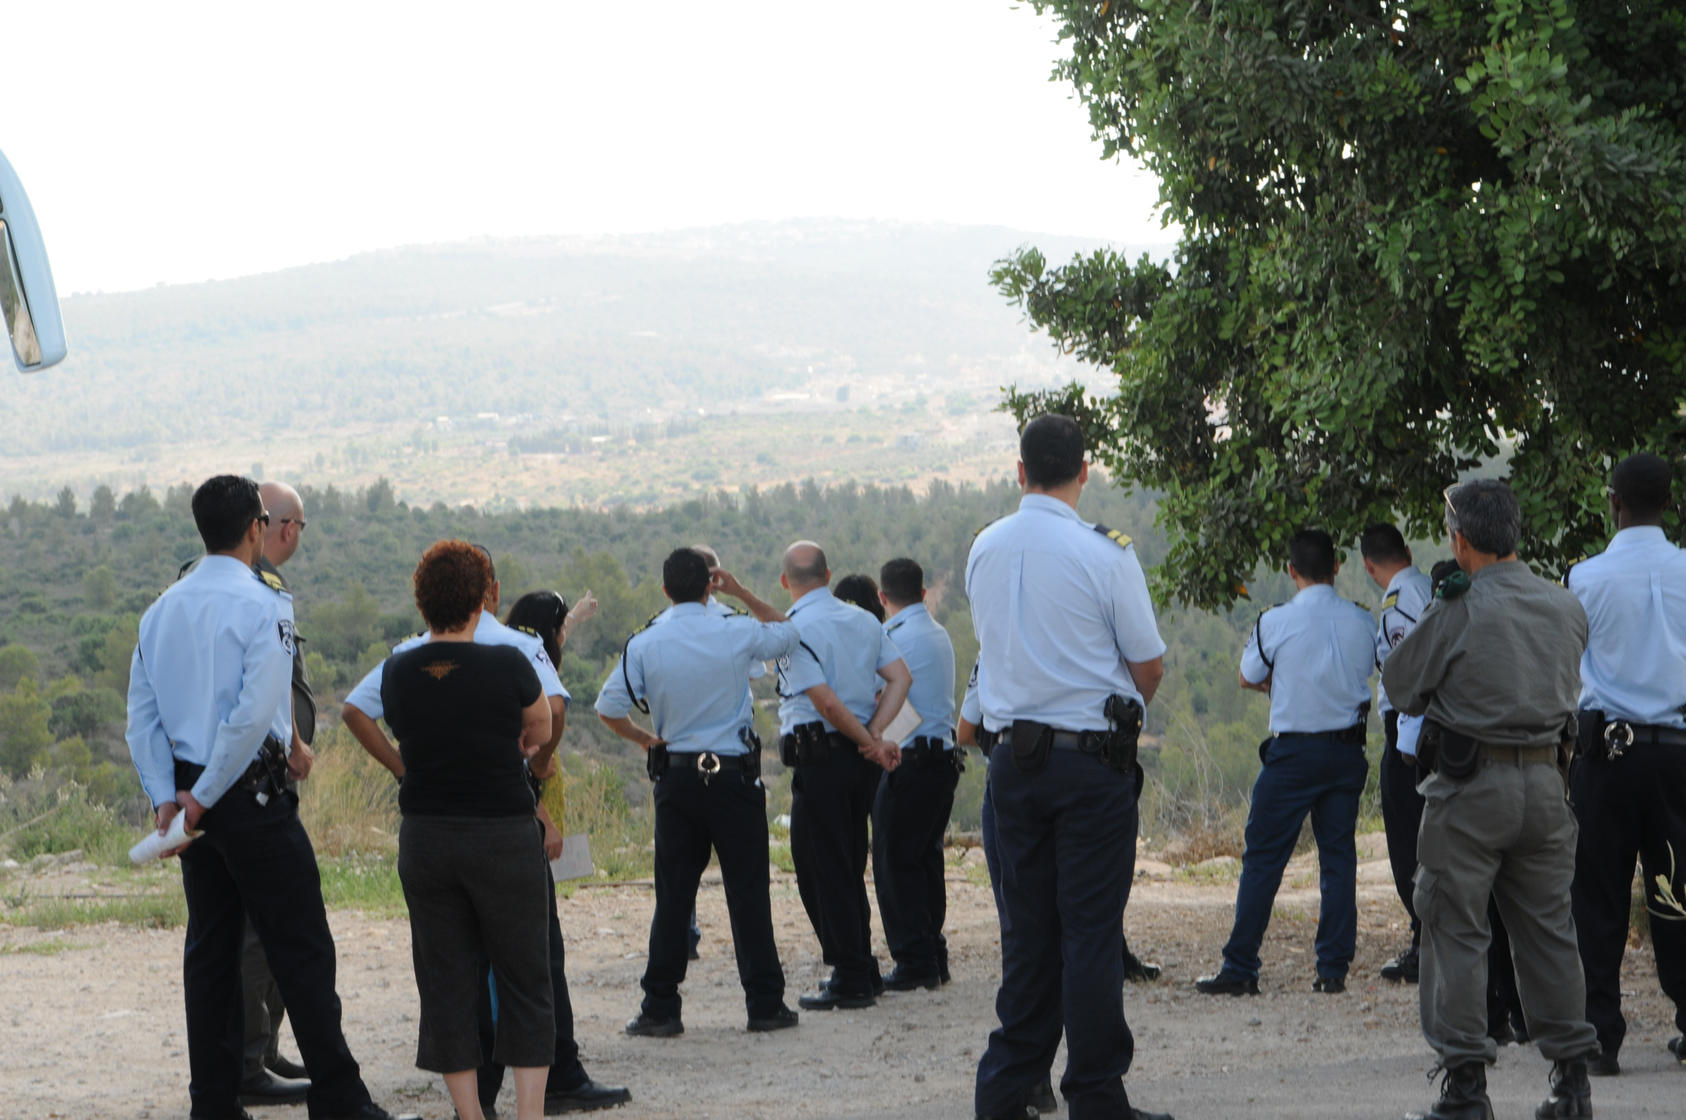 Israeli police officers on a study tour of the Arab town of Kfar Qara, participating in The Abraham Fund Initiative's Arab Society-Police Relations Initiative